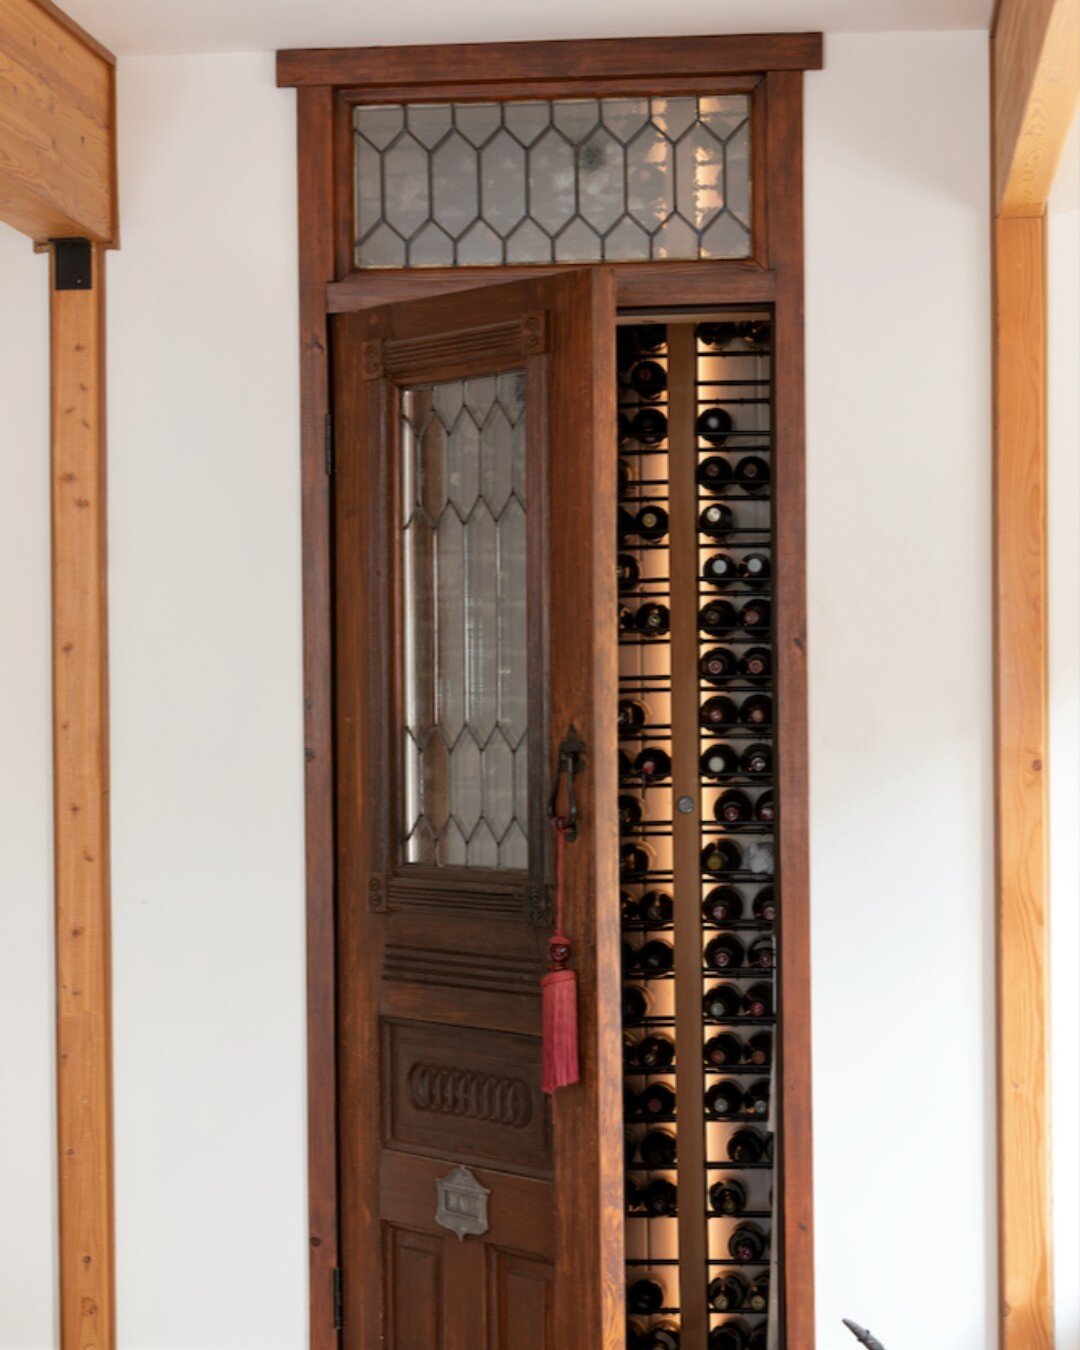 A beautiful, rustic door, and dozens of bottles of wine... Name a better combo - I'll wait 😍

#whistlercabin #seatosky #custommillworkwhistler #hardwood #interiordesign #millwork #woodwork #squamish #whistler #beautiful #love #custom #inspiration